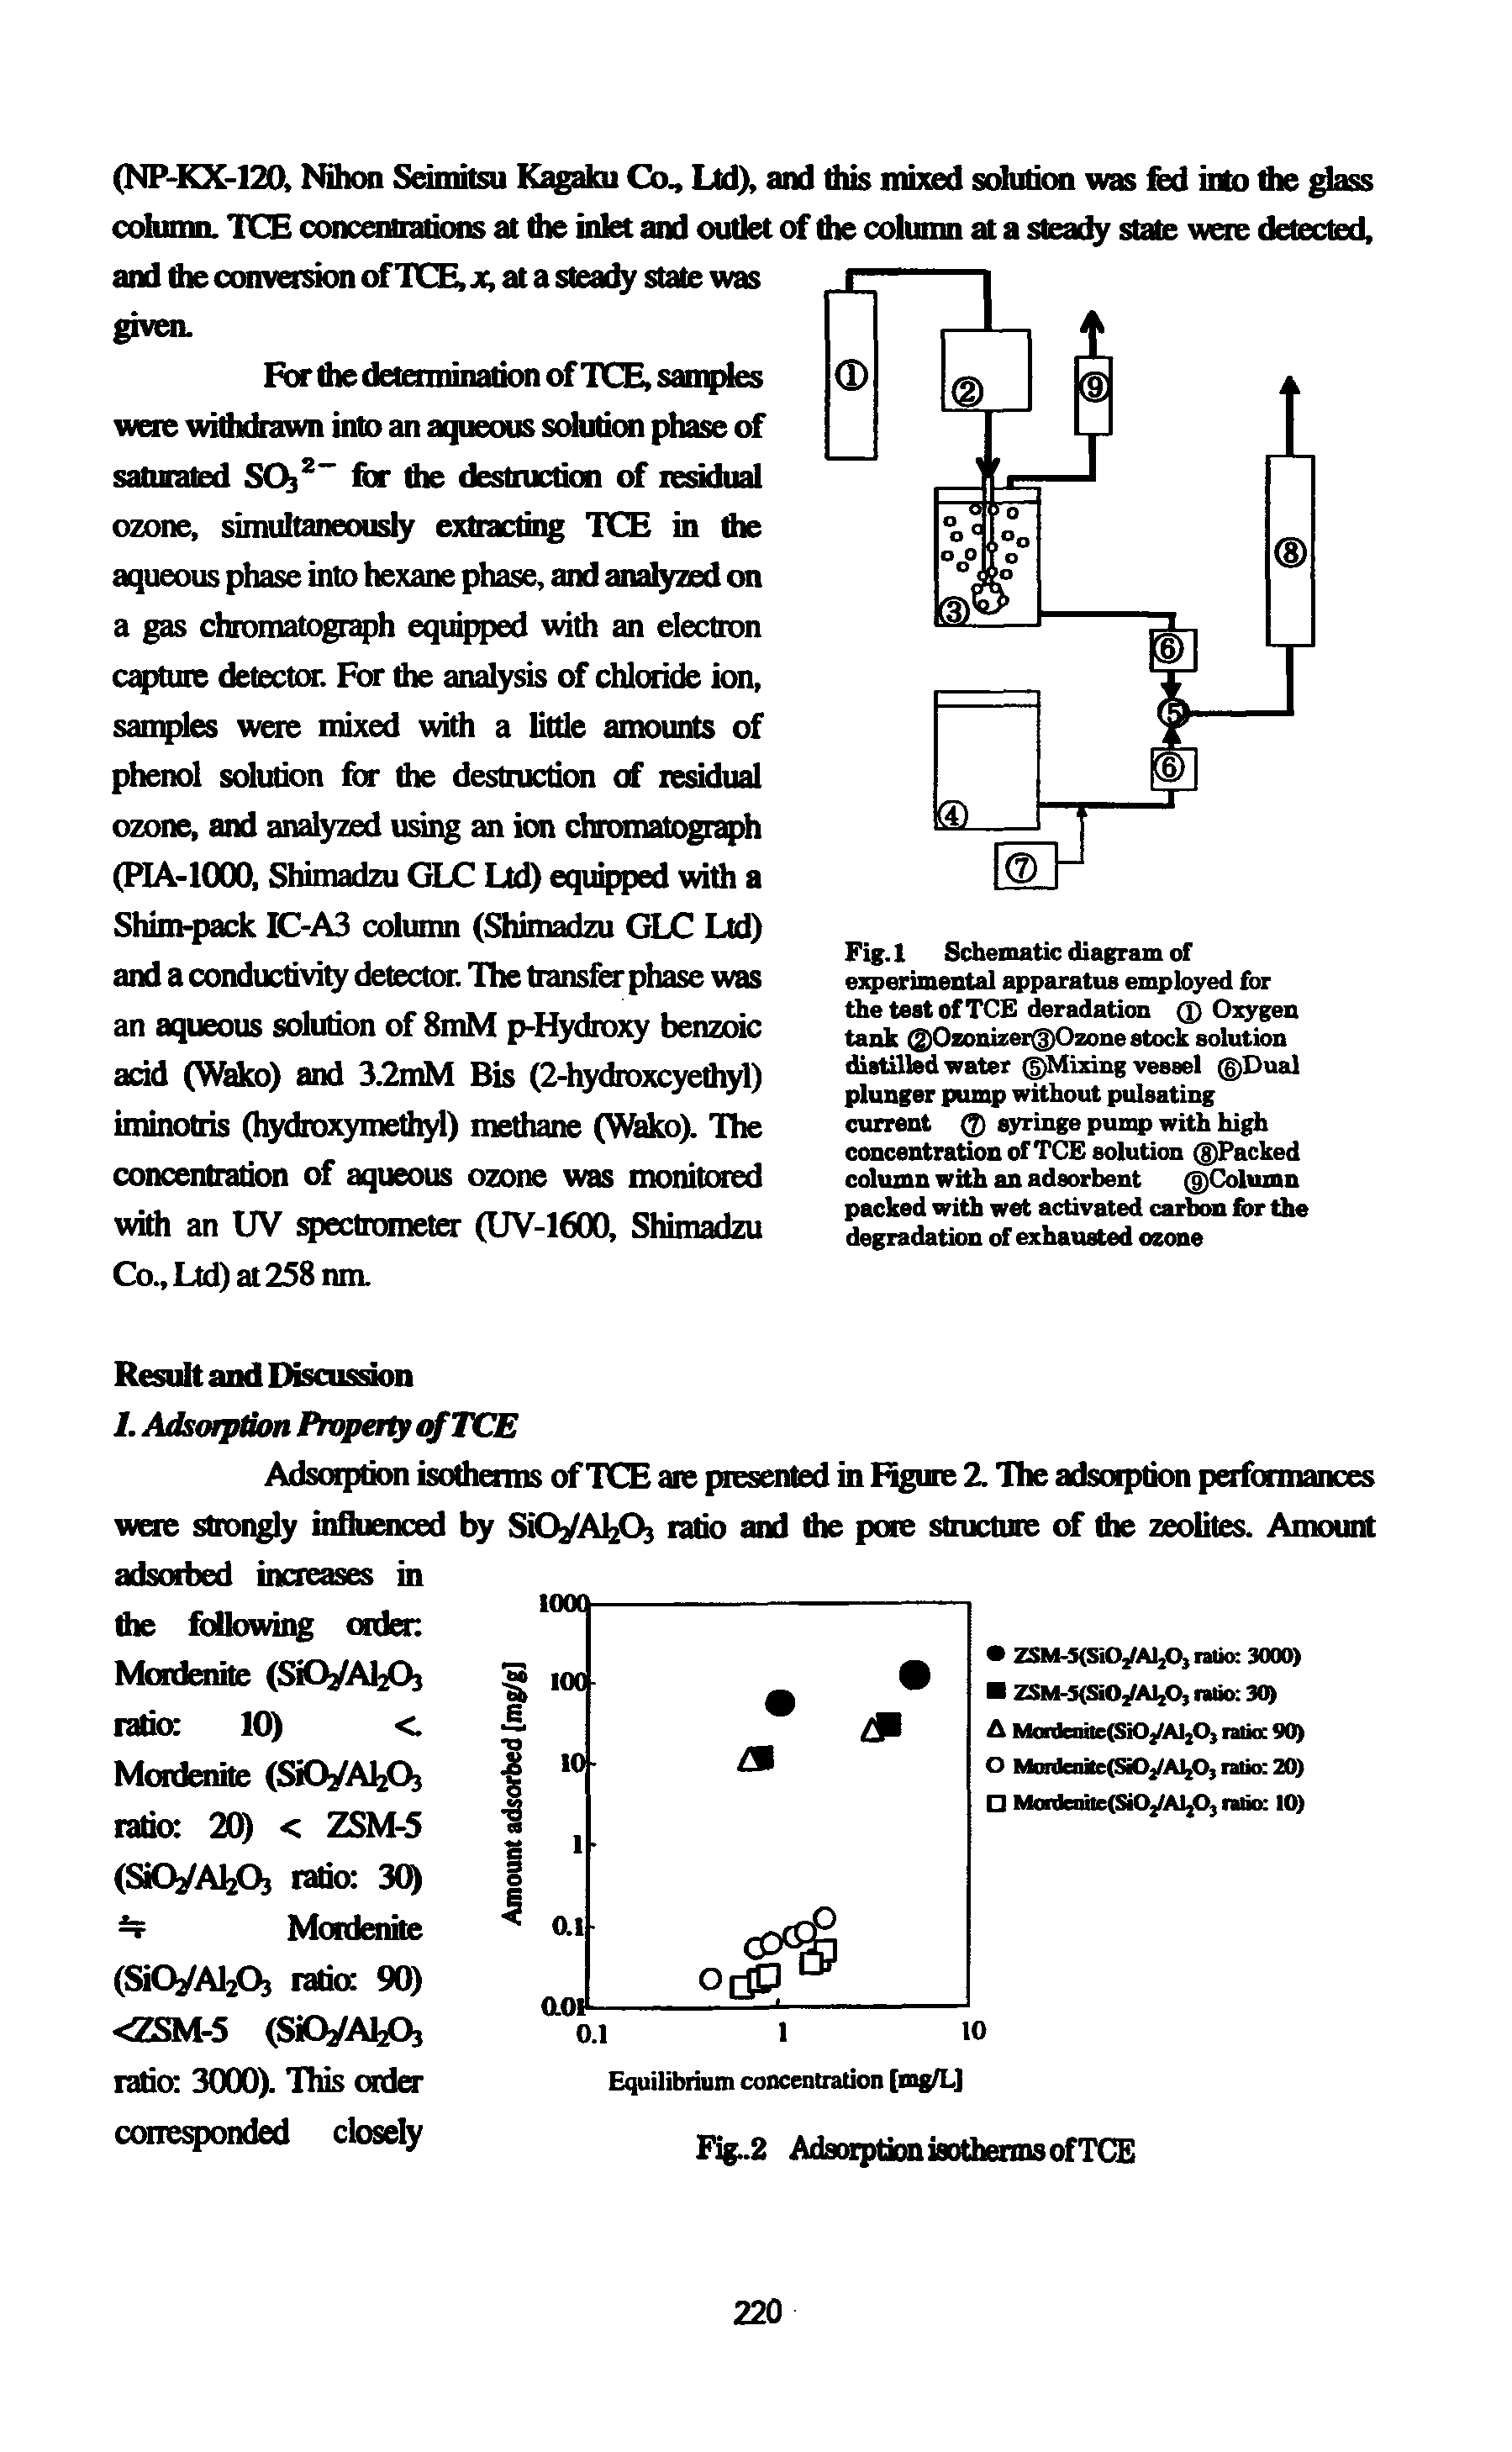 Fig. 1 Schematic diagram of experimental apparatus employed for the test of TCE deradation Q) Oxygen tank d)Ozonizer(DOzone stock solution distilled erater Mixing vessel ( )Dual plunger pump without pulsating current (J) syringe pump with high concentration of TCE solution Packed column with an adsorbent Column packed with wet activated carbon for the degradation of exhausted ozone...